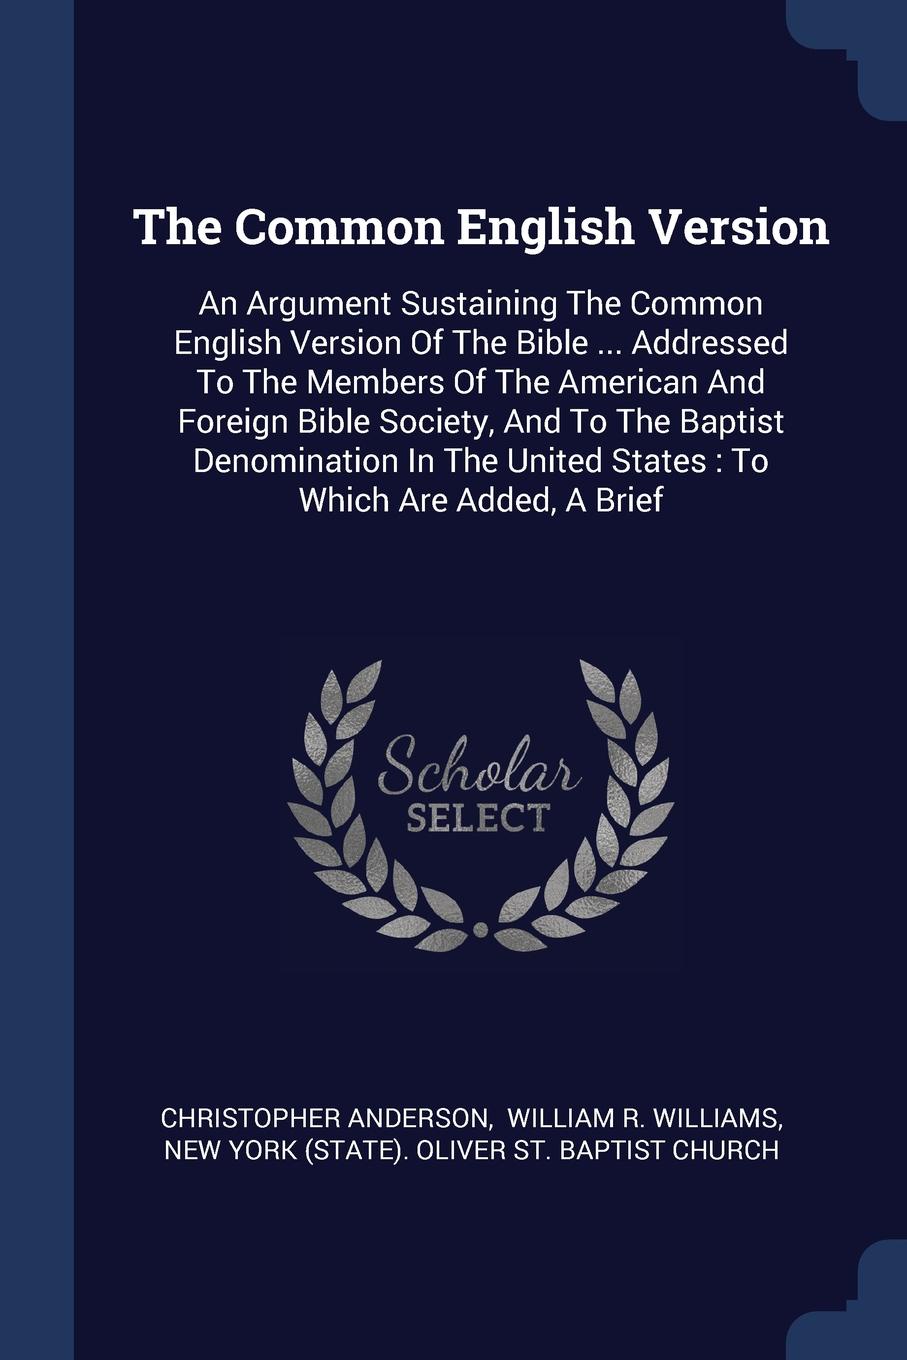 The Common English Version. An Argument Sustaining The Common English Version Of The Bible ... Addressed To The Members Of The American And Foreign Bible Society, And To The Baptist Denomination In The United States : To Which Are Added, A Brief